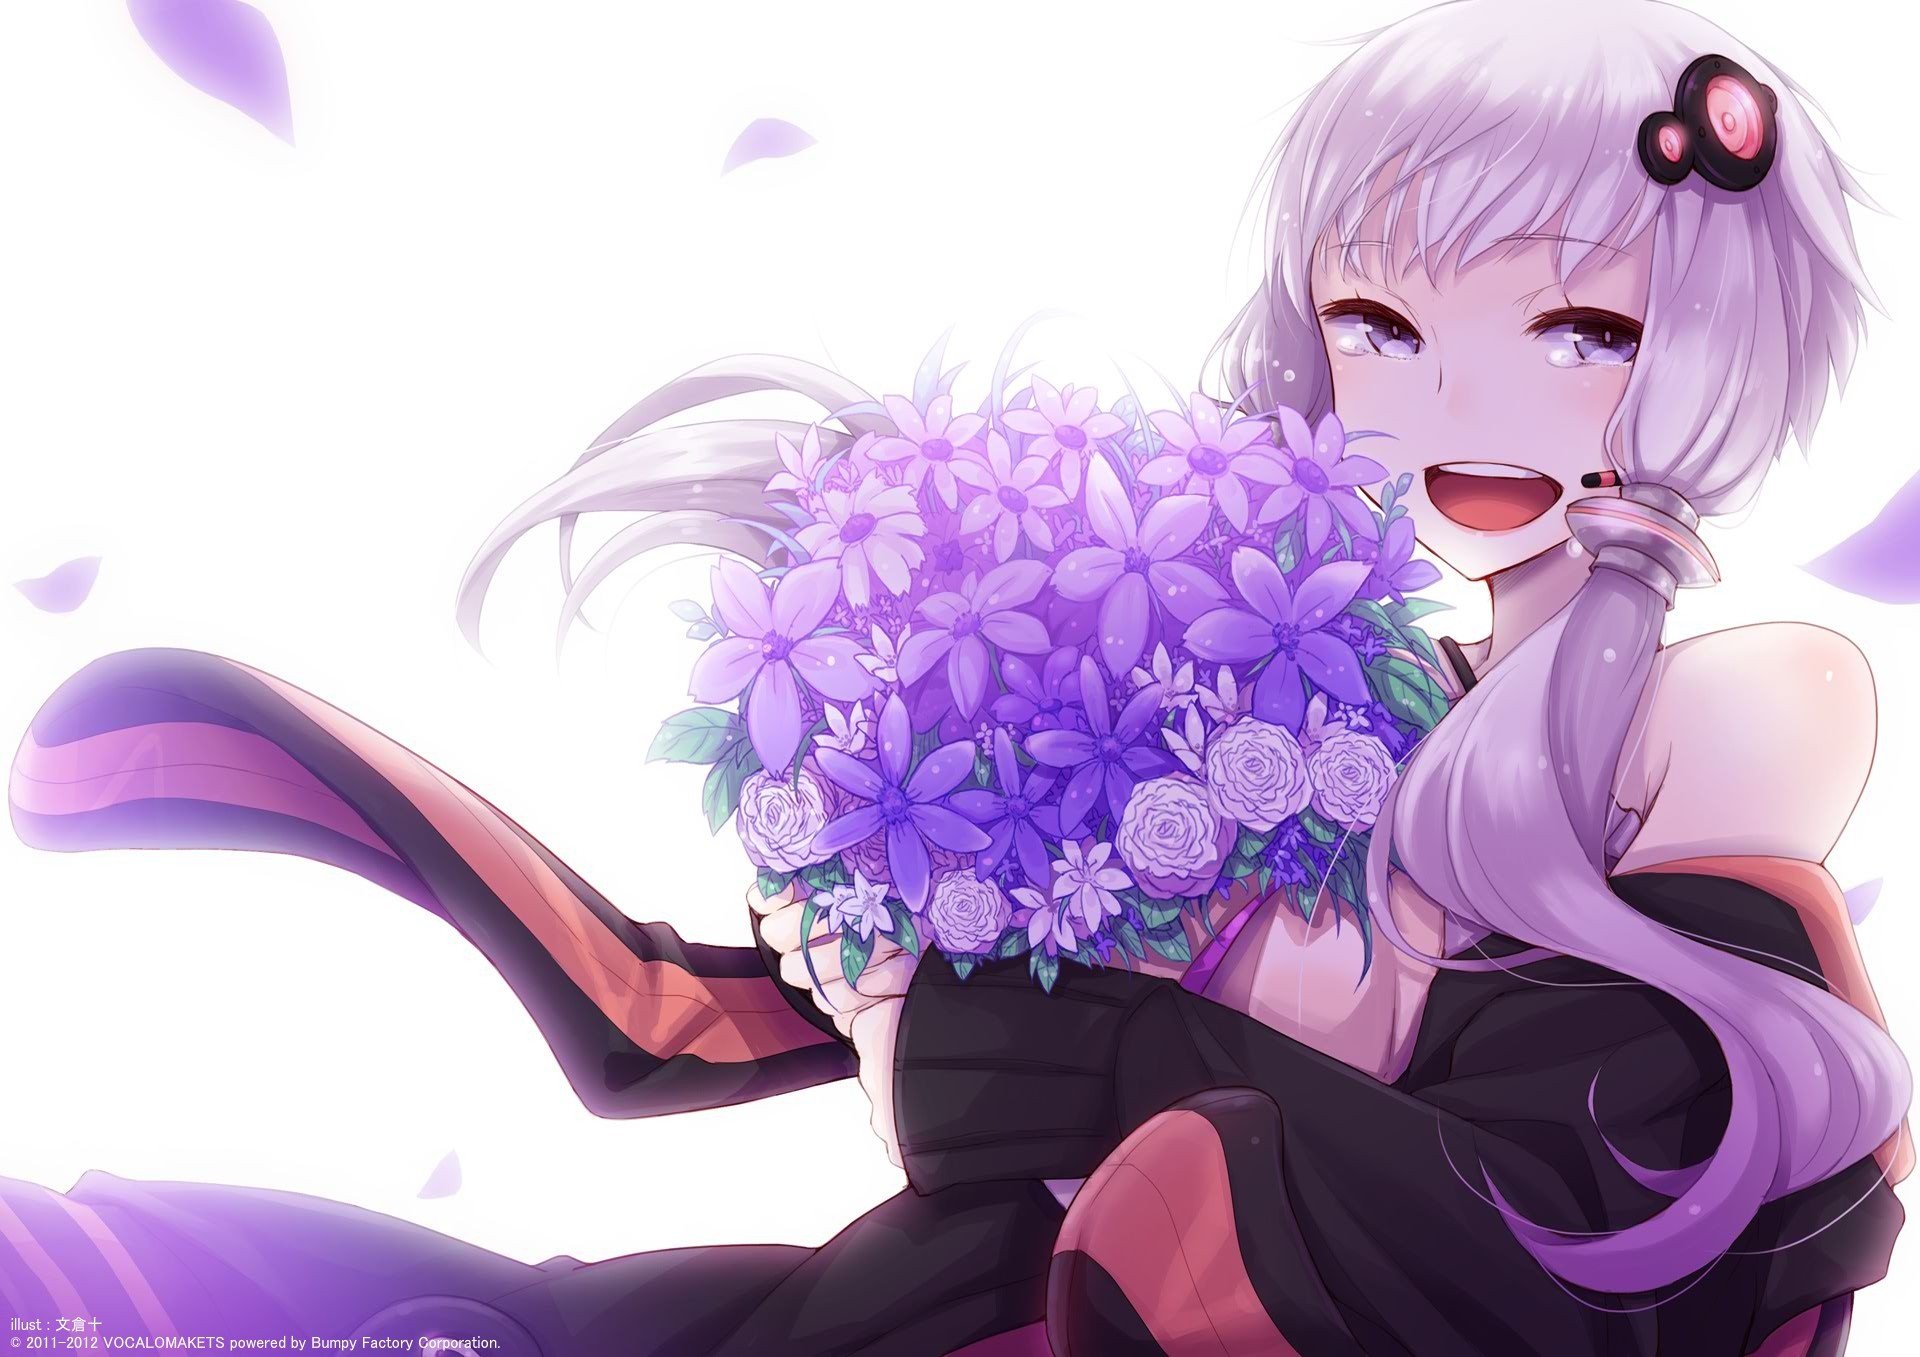 vocaloid, Flowers, Long, Hair, Purple, Hair, Animal, Ears, Twintails, Smiling, Open, Mouth, Purple, Eyes, Bouquet, Bunny, Ears, Flower, Petals, Simple, Background, Anime, Girls, White, Background, Hair, Ornament Wallpaper